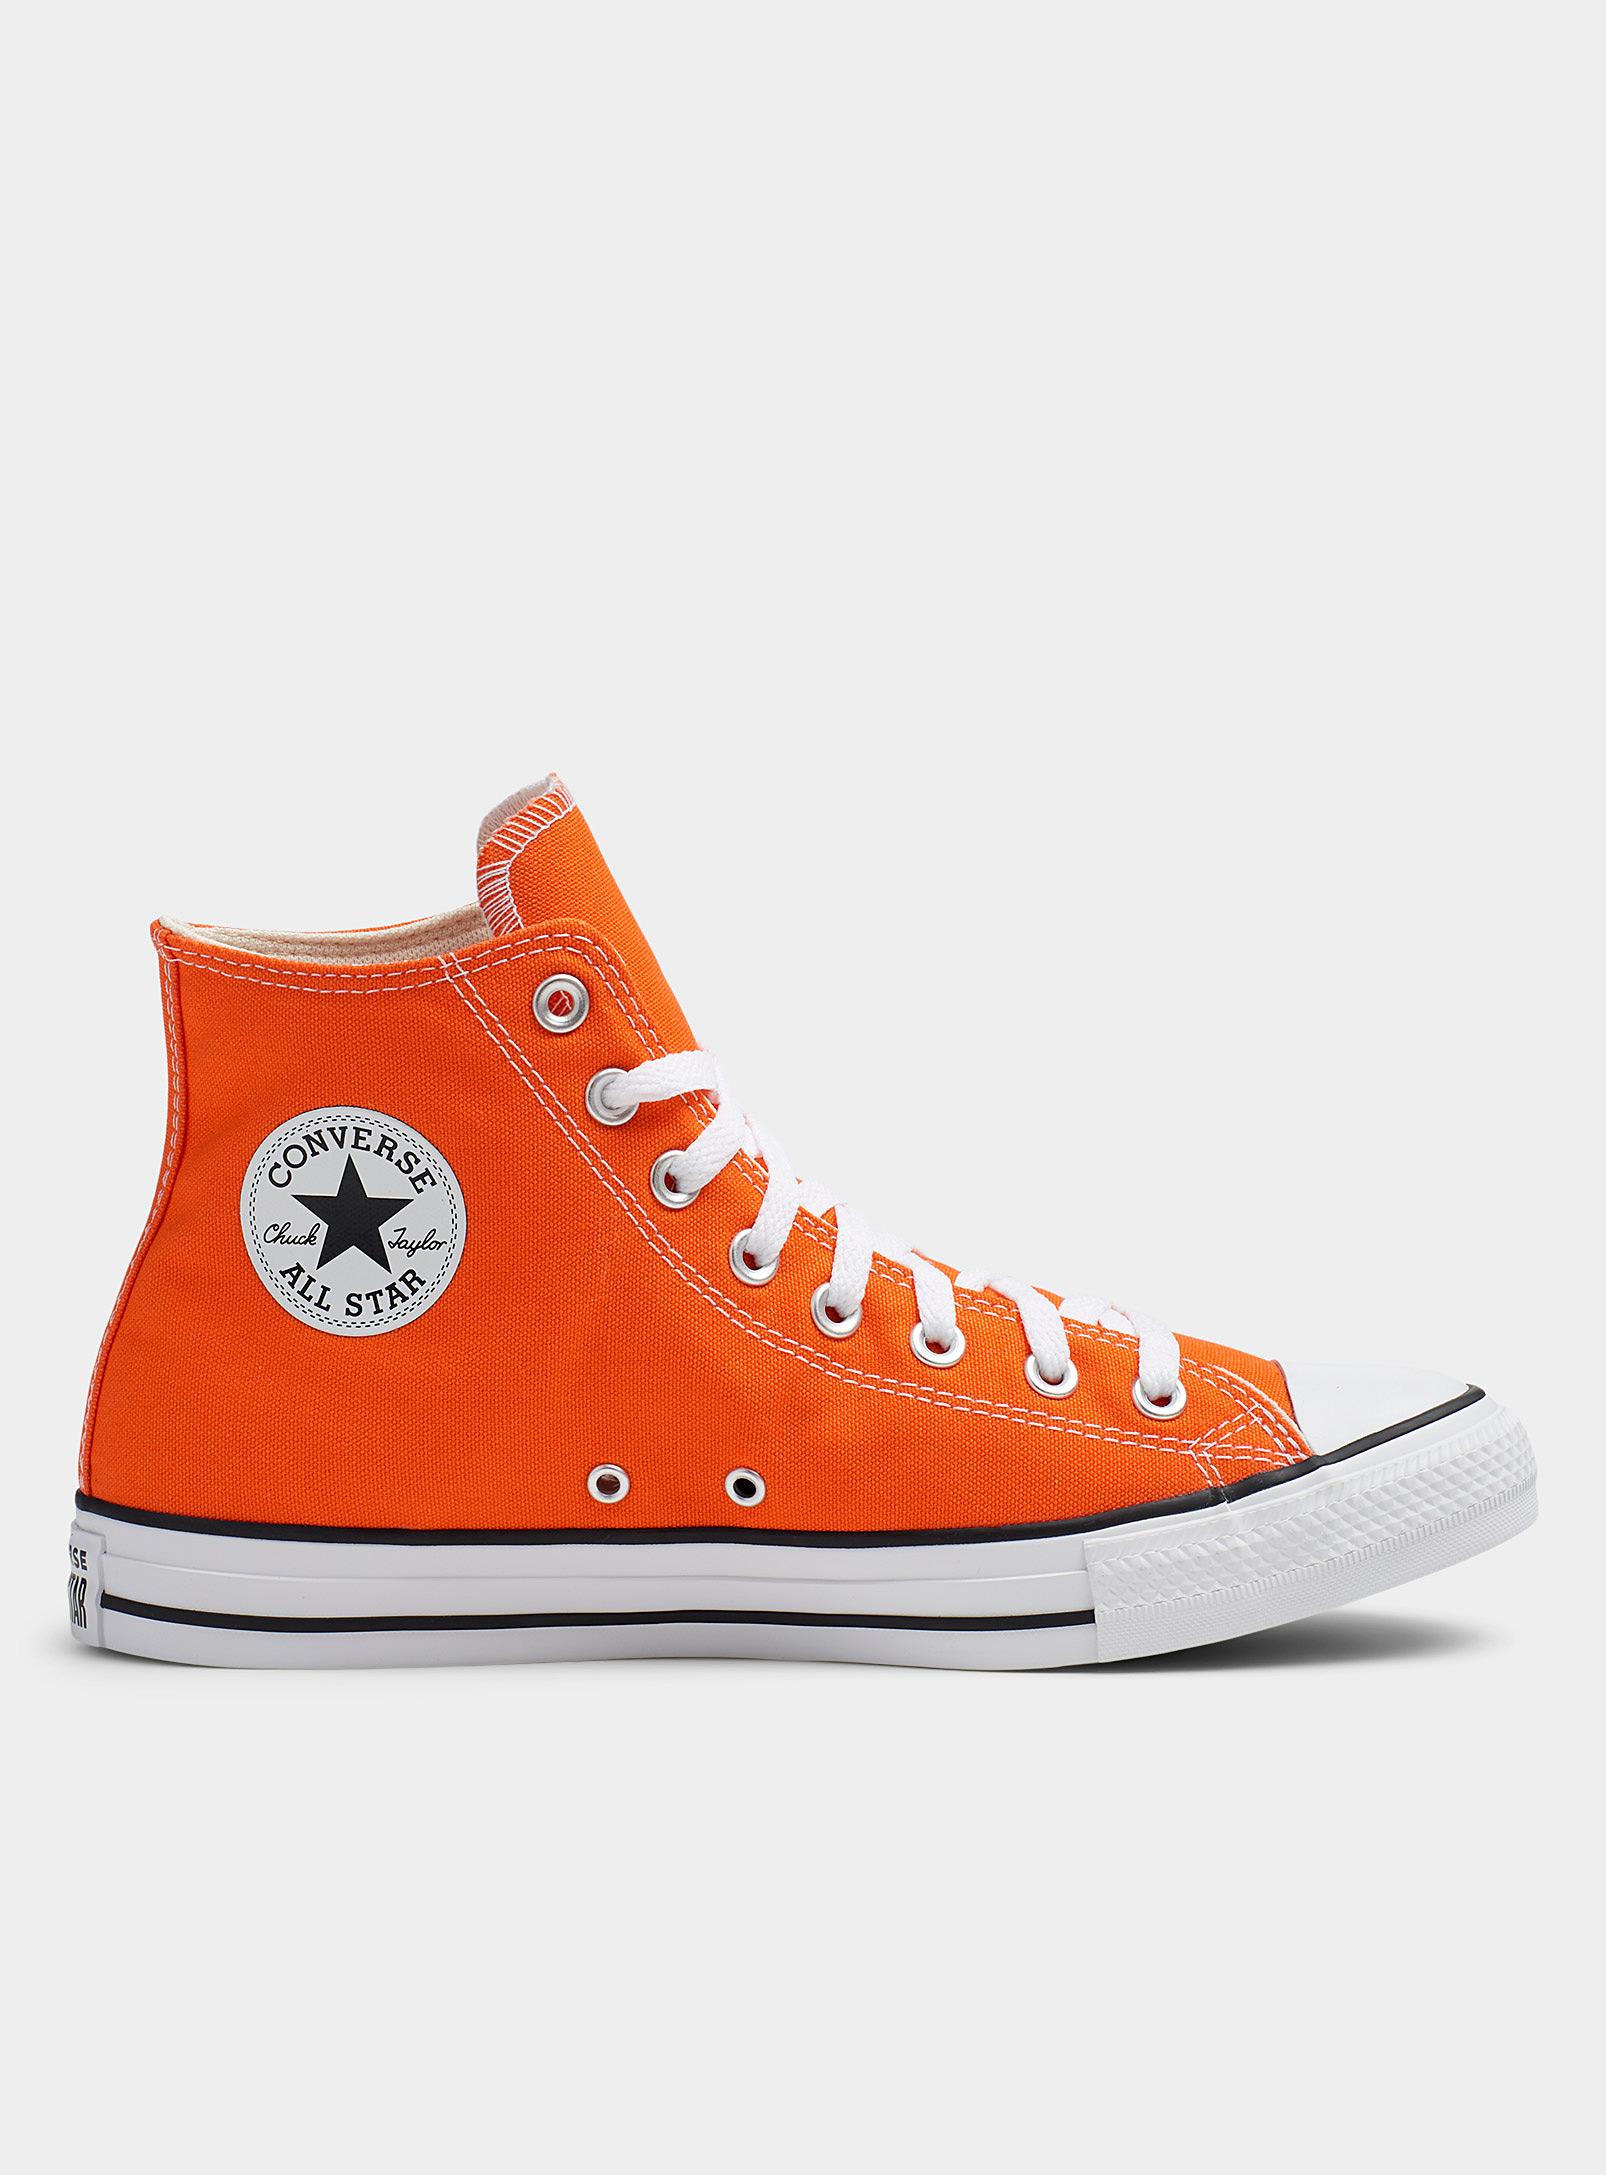 Converse Orange Chuck Taylor All Star High Top Sneakers Men for Men | Lyst